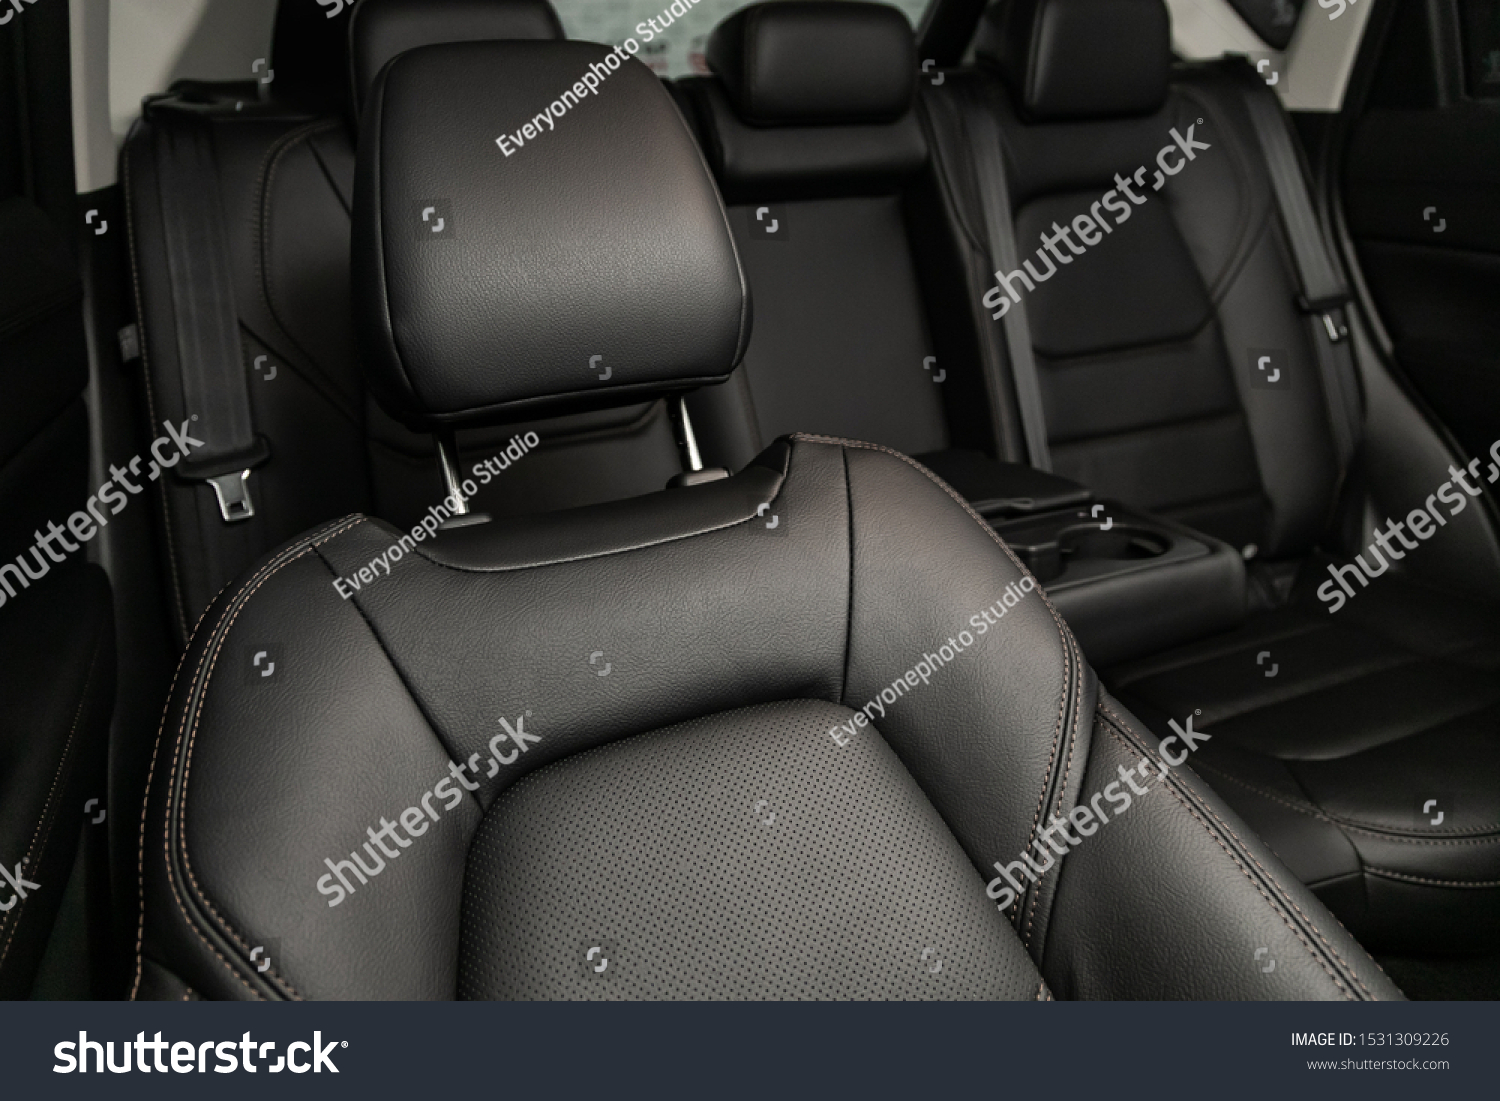 Close-up rear seat made of black leather with a head restraint, in the background passenger seats with seat belts. Luxury car interior #1531309226